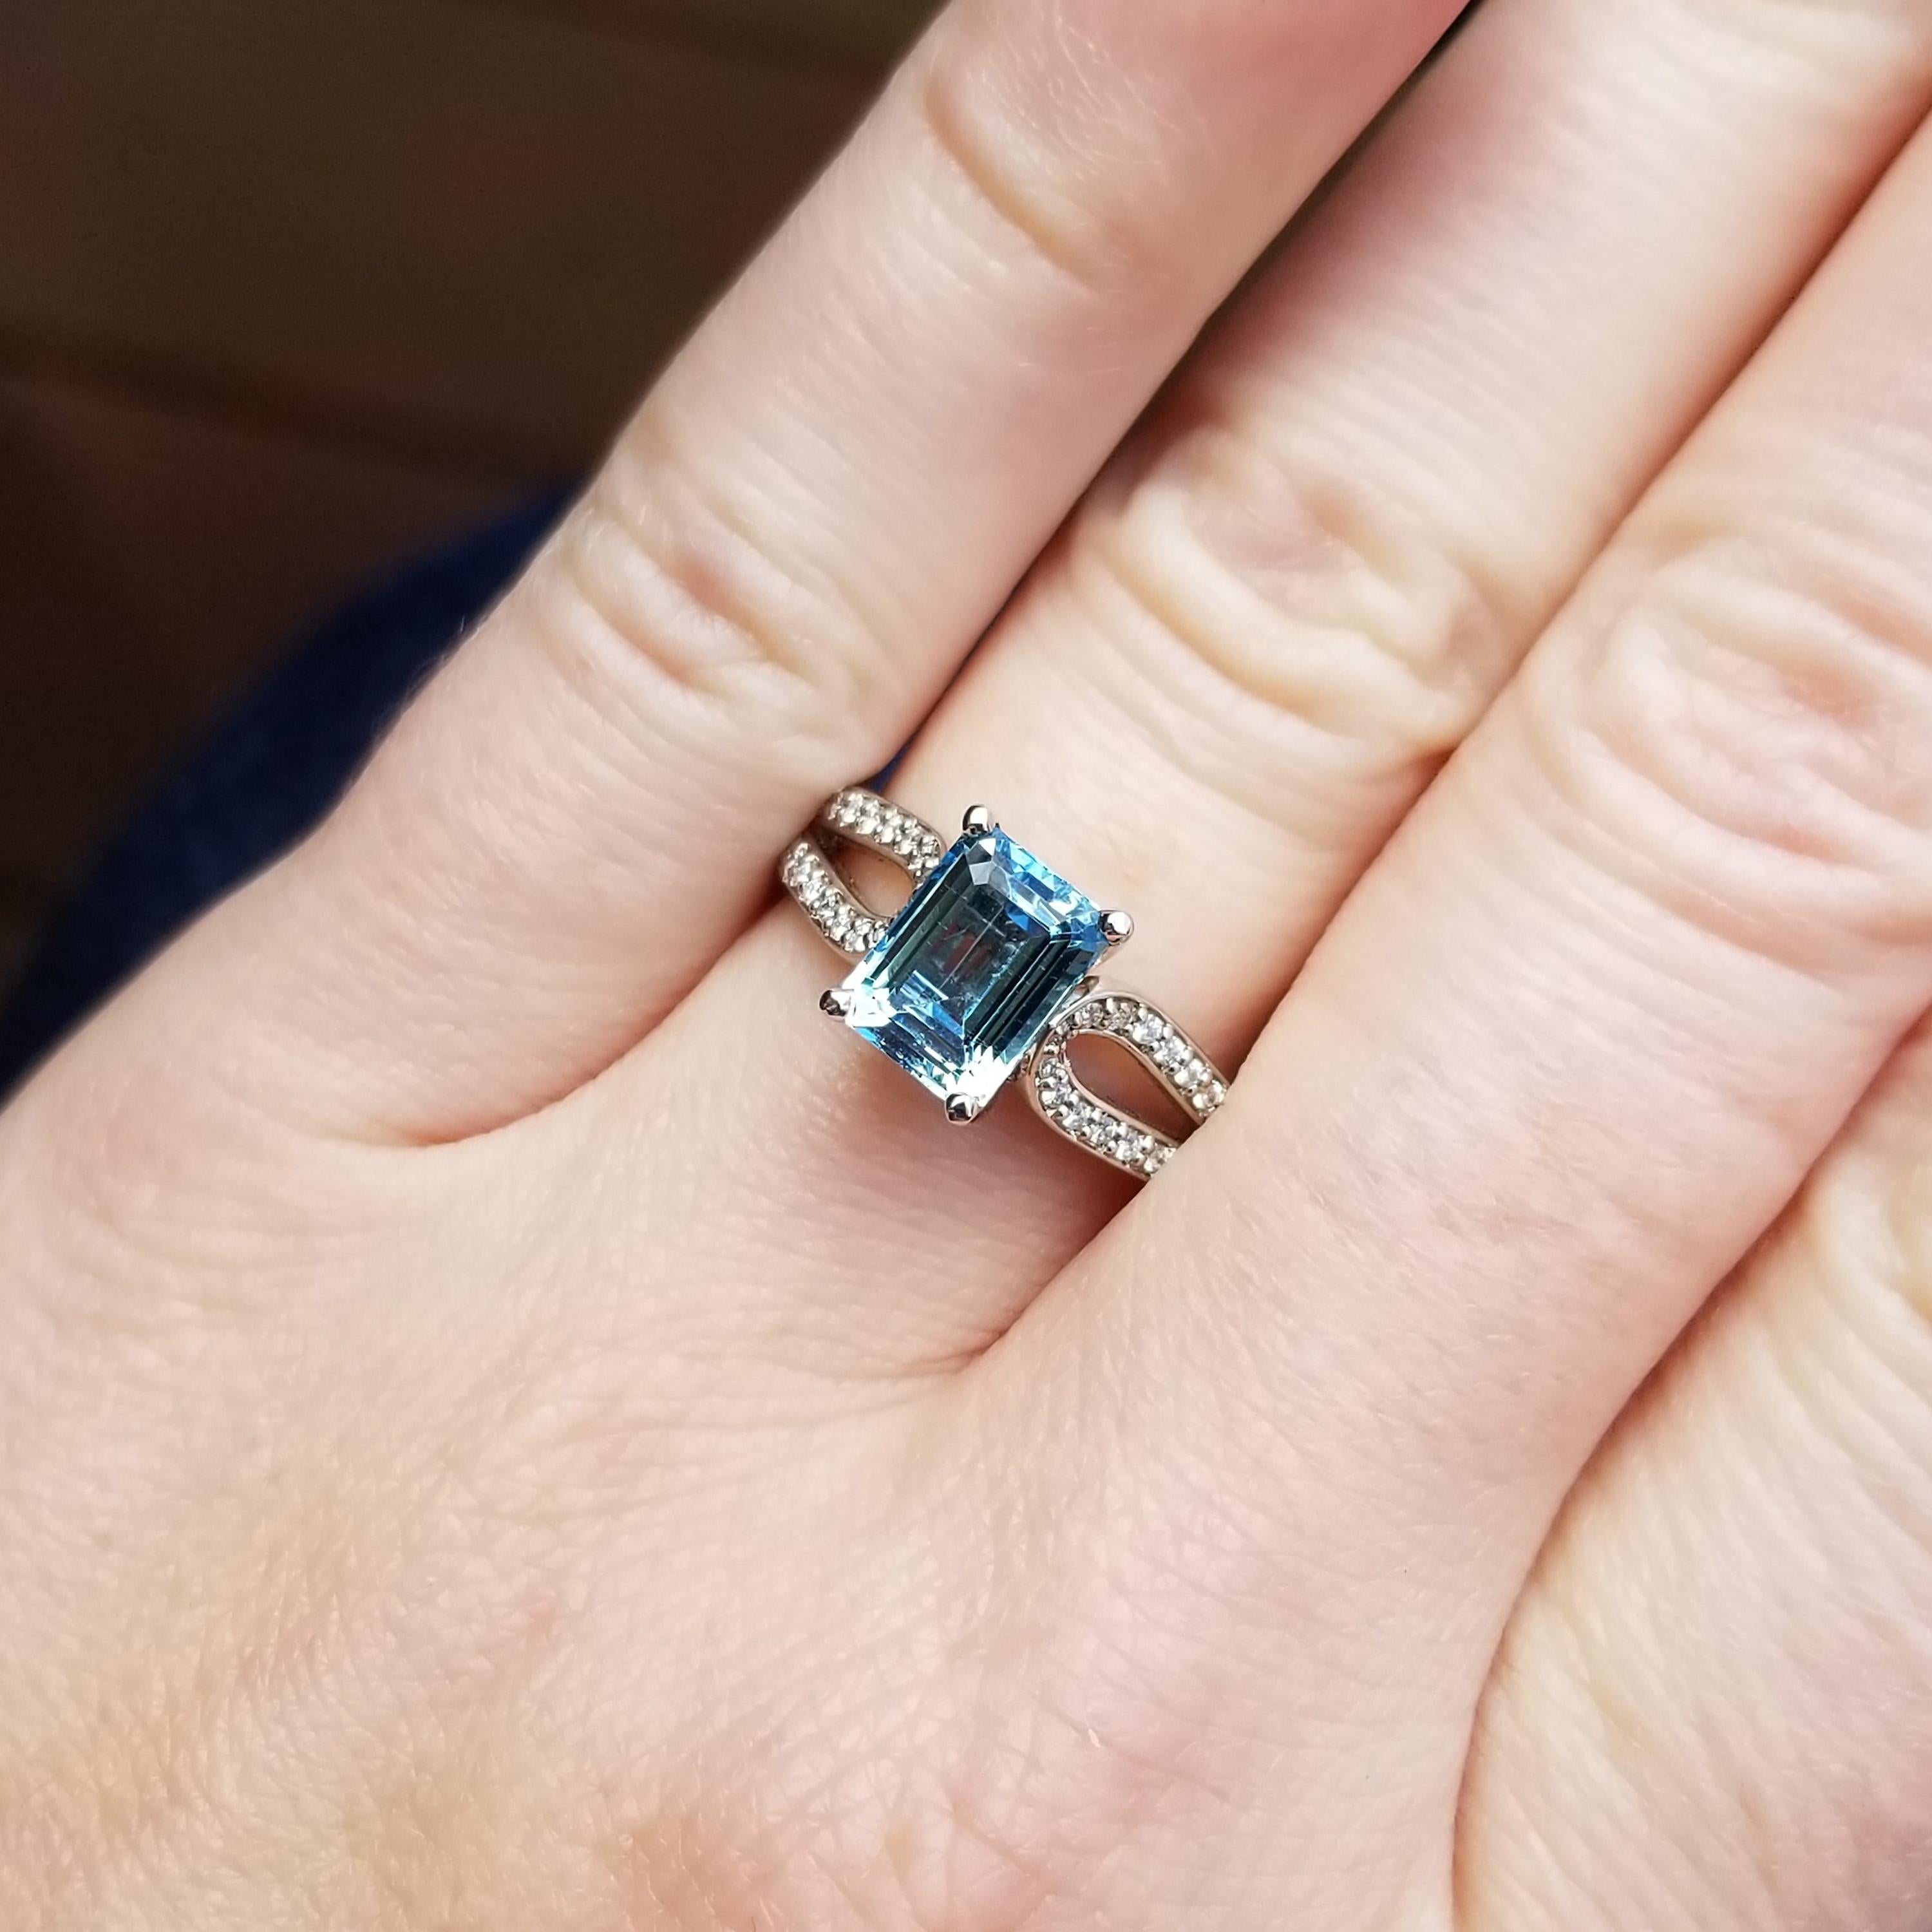 There is so much elegance in simplicity: few things rival an emerald cut aquamarine for a clean, classic jewelry look. This aquamarine is a particularly gorgeous shade of blue; there is nothing faint or anemic about this color! The perfectly